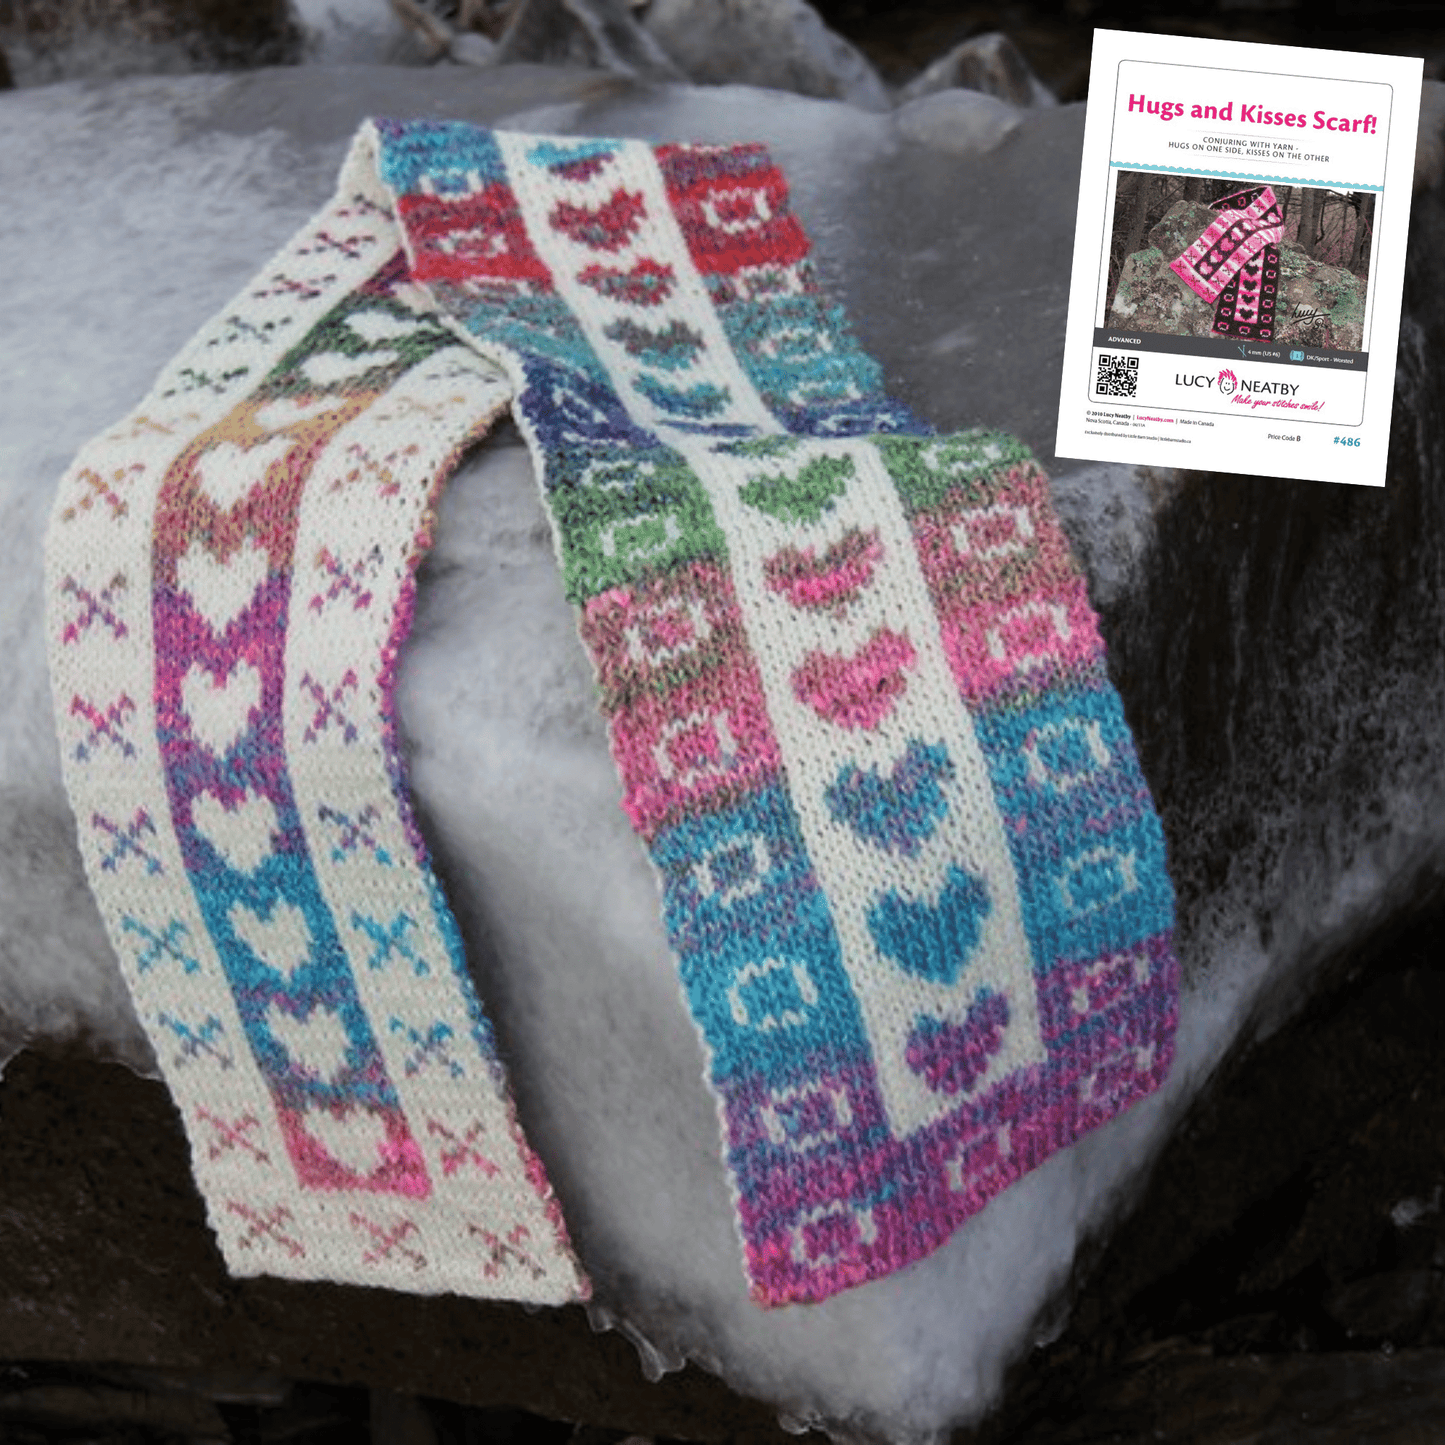 Hugs and Kisses Scarf by Lucy Neatby - Digital Pattern